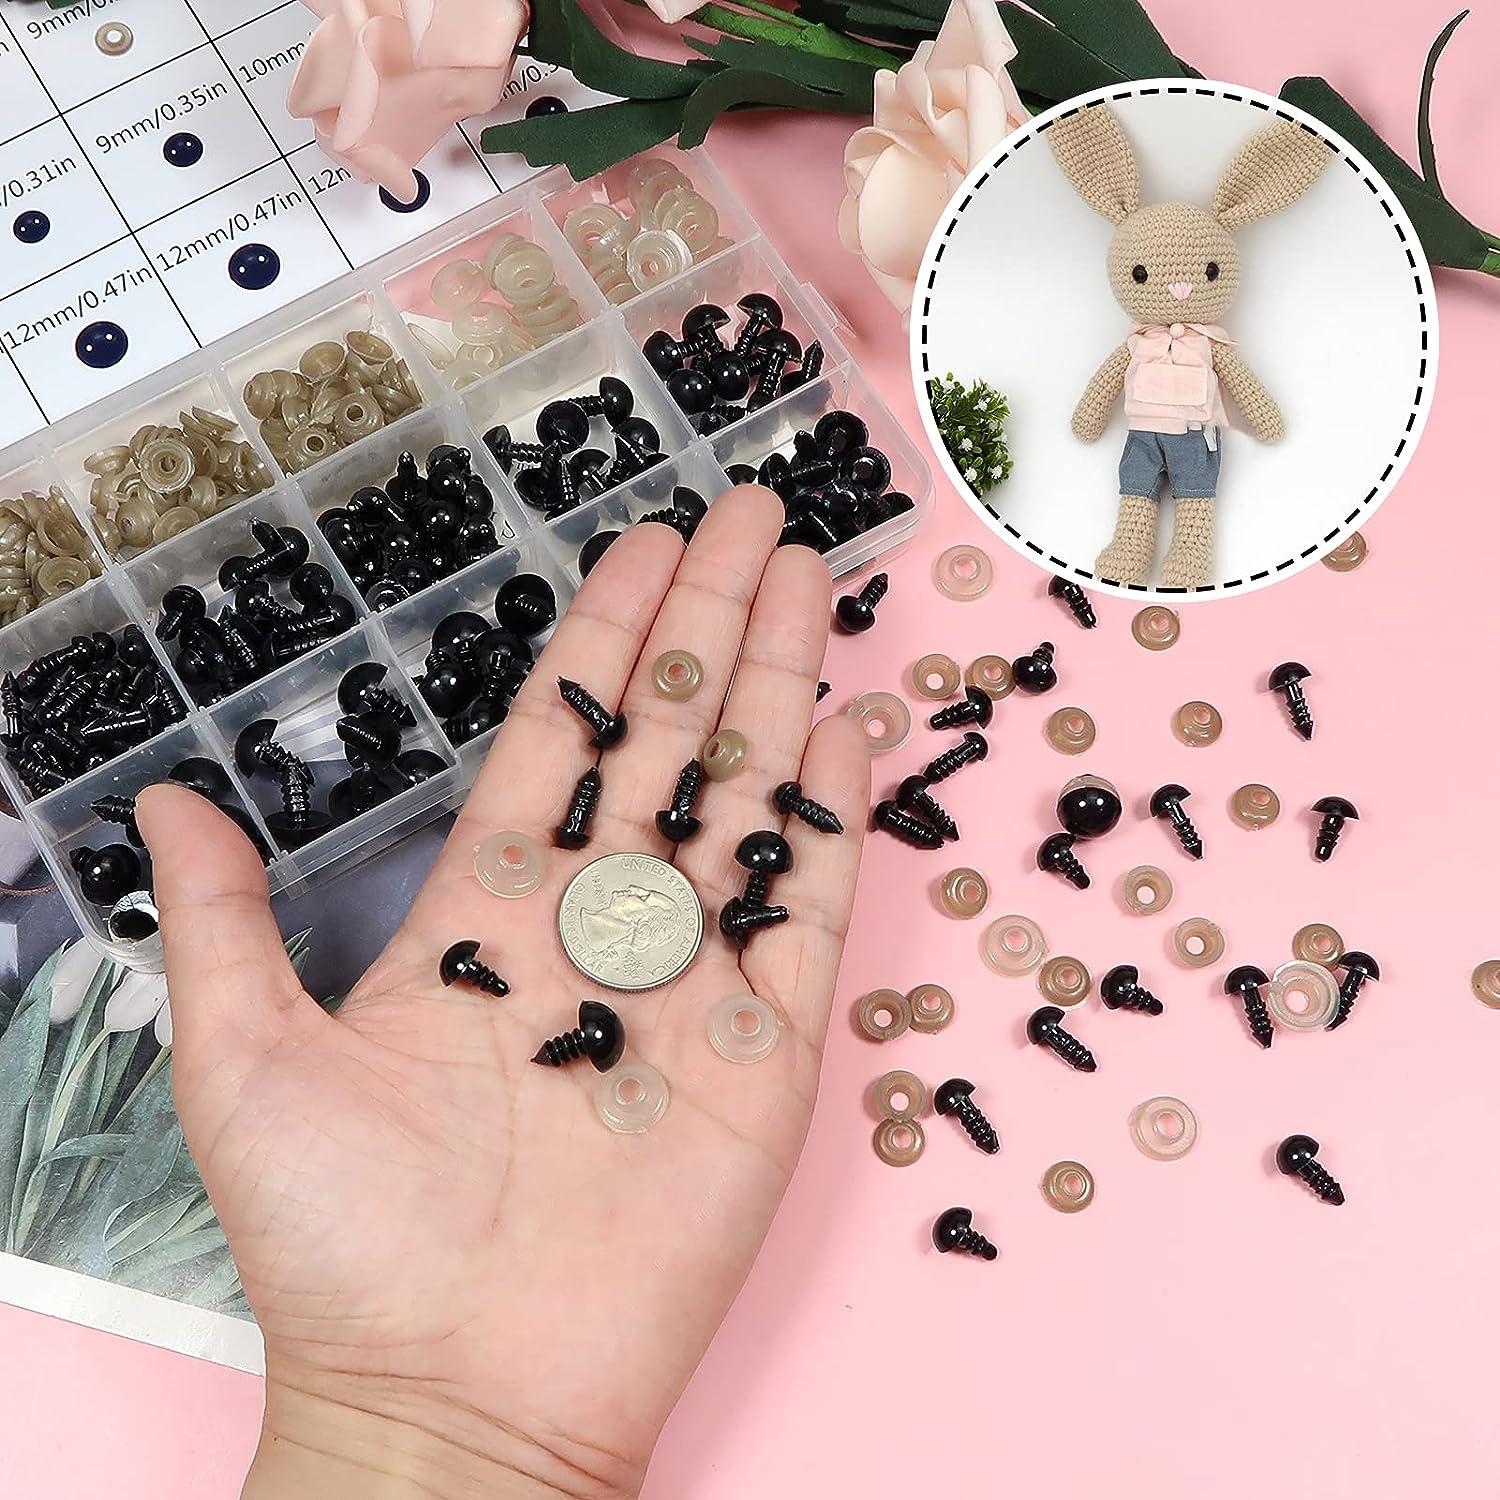 TOAOB 150pcs 16mm Black Plastic Safety Eyes Crafts Safety Eyes with Washers  for Stuffed Animals Amigurumis Crochet Bears Doll Making